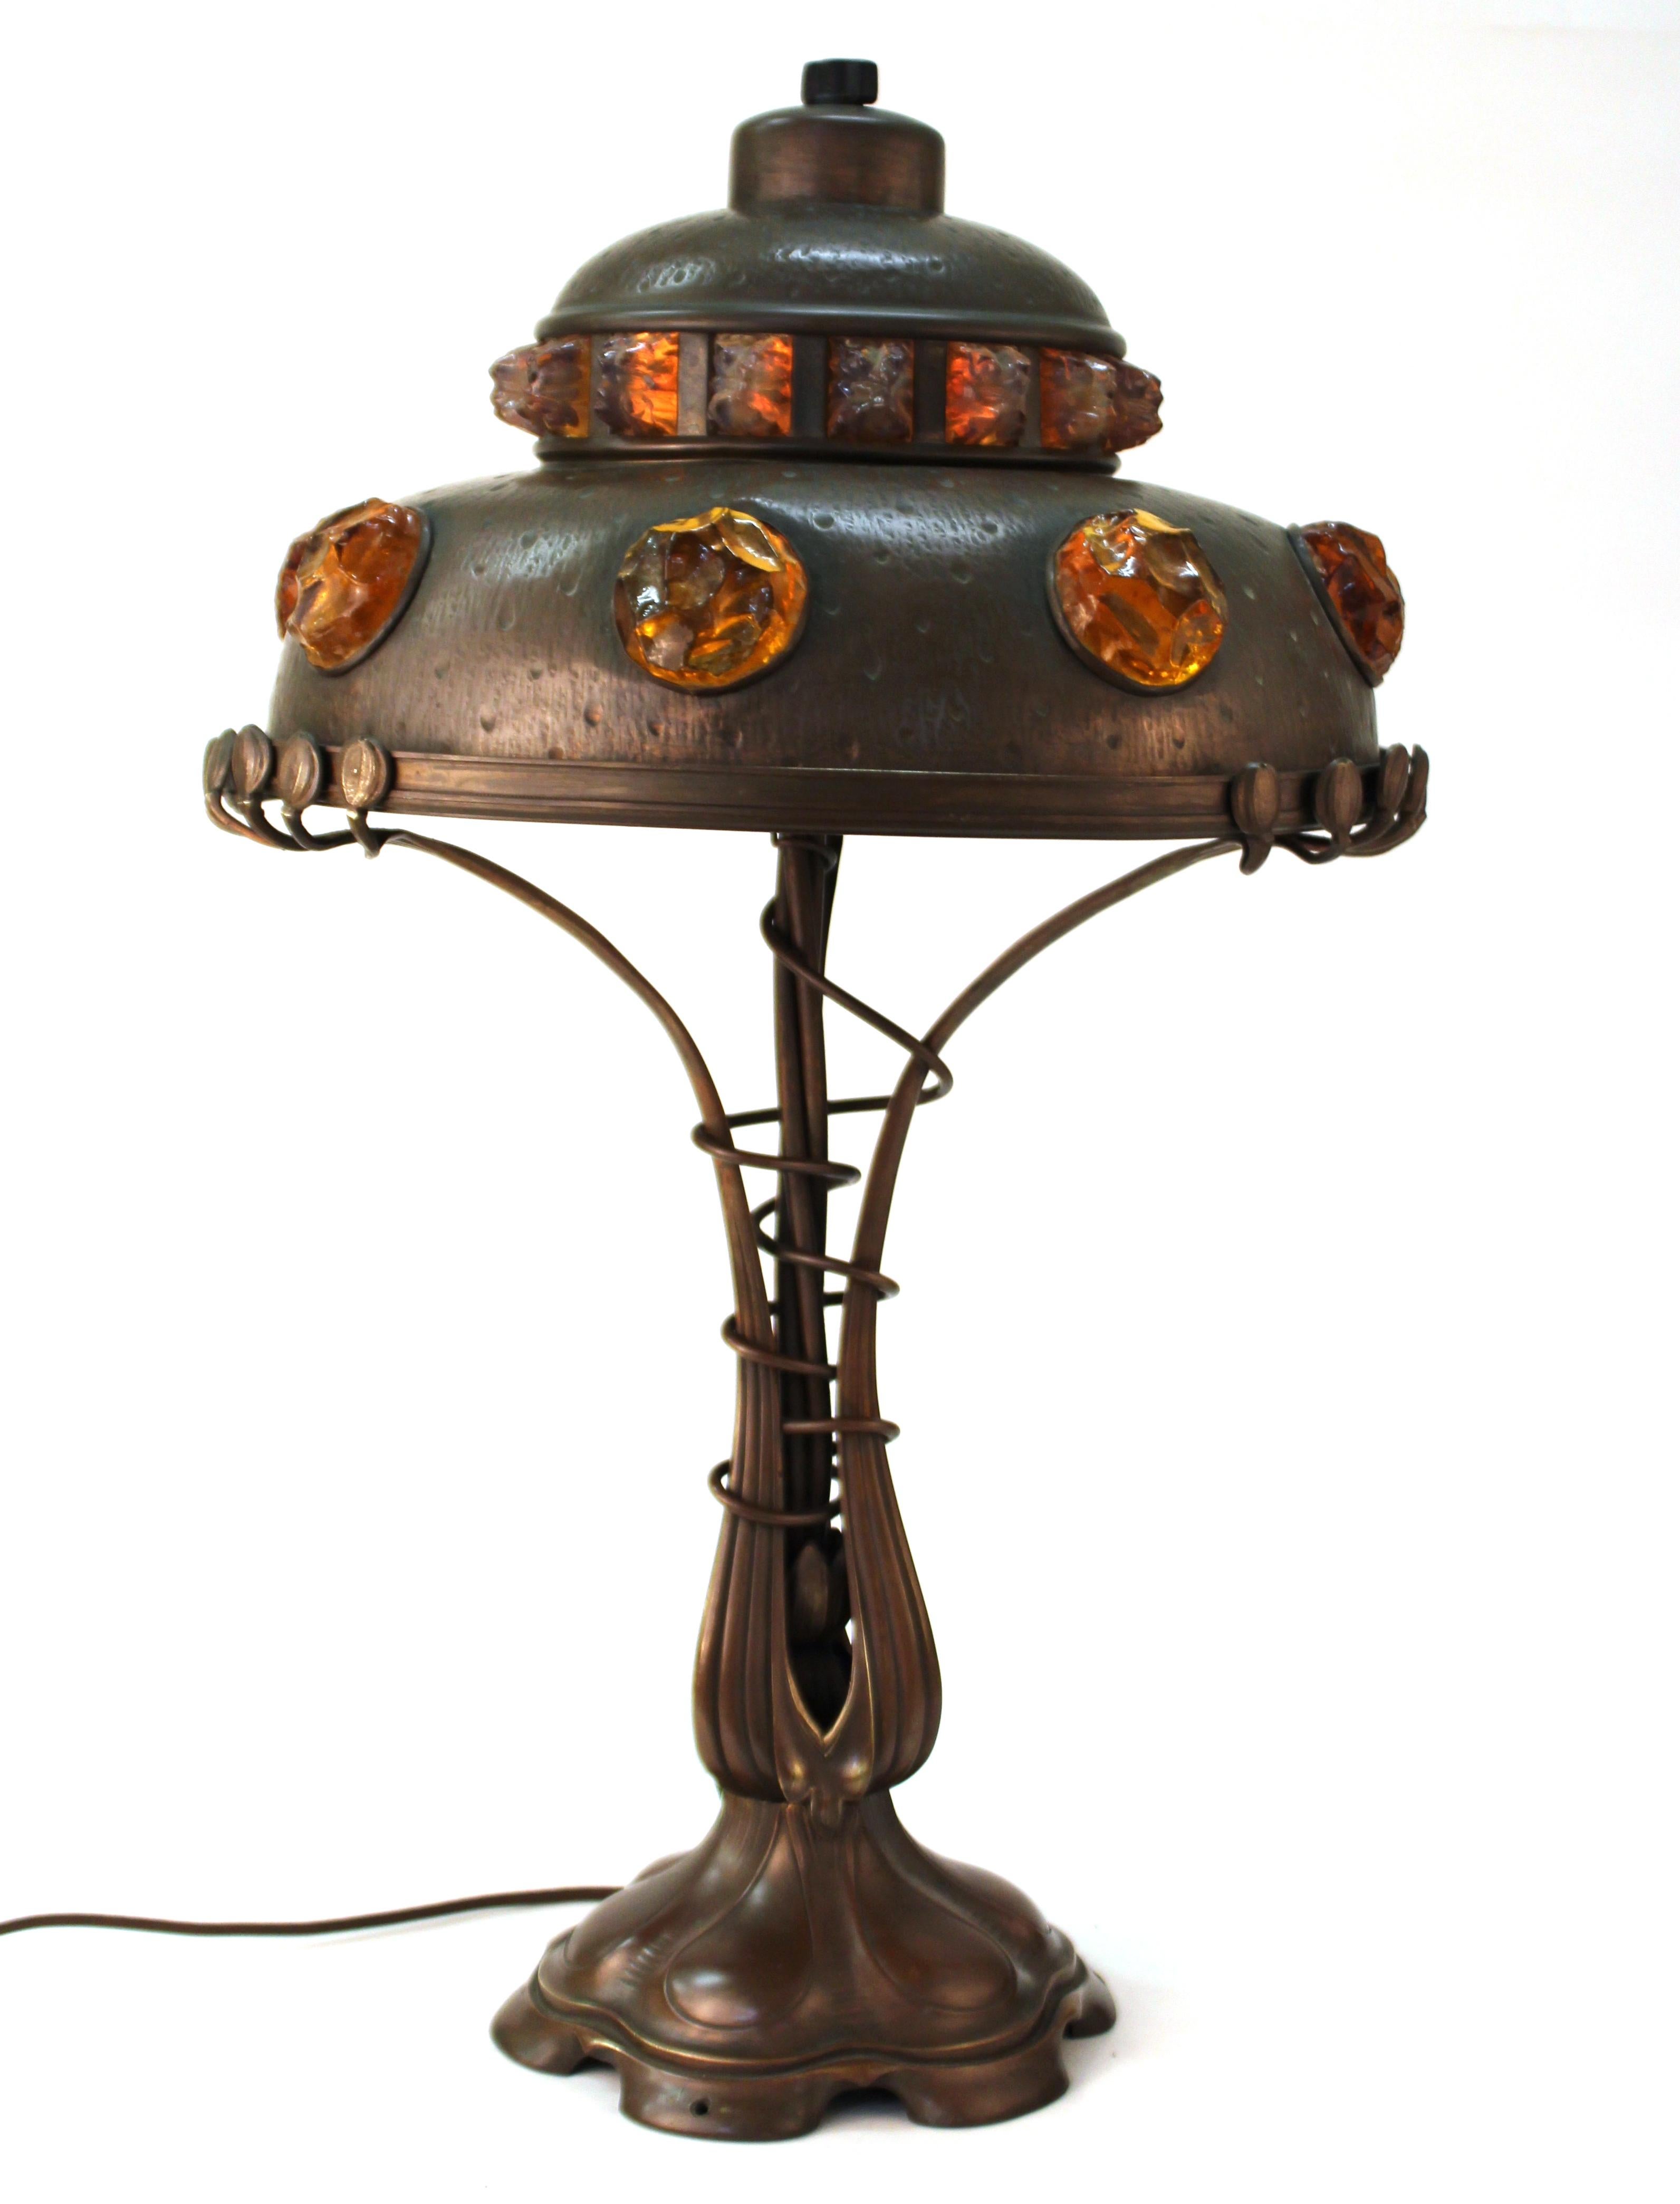 Austrian Art Nouveau period table lamp made in cast bronze and brass repousse, with inserted chunk glass jewels in the shade. The piece was made in Austria in the 1900's and has been rewired. It takes three light bulbs and has a light switch on the